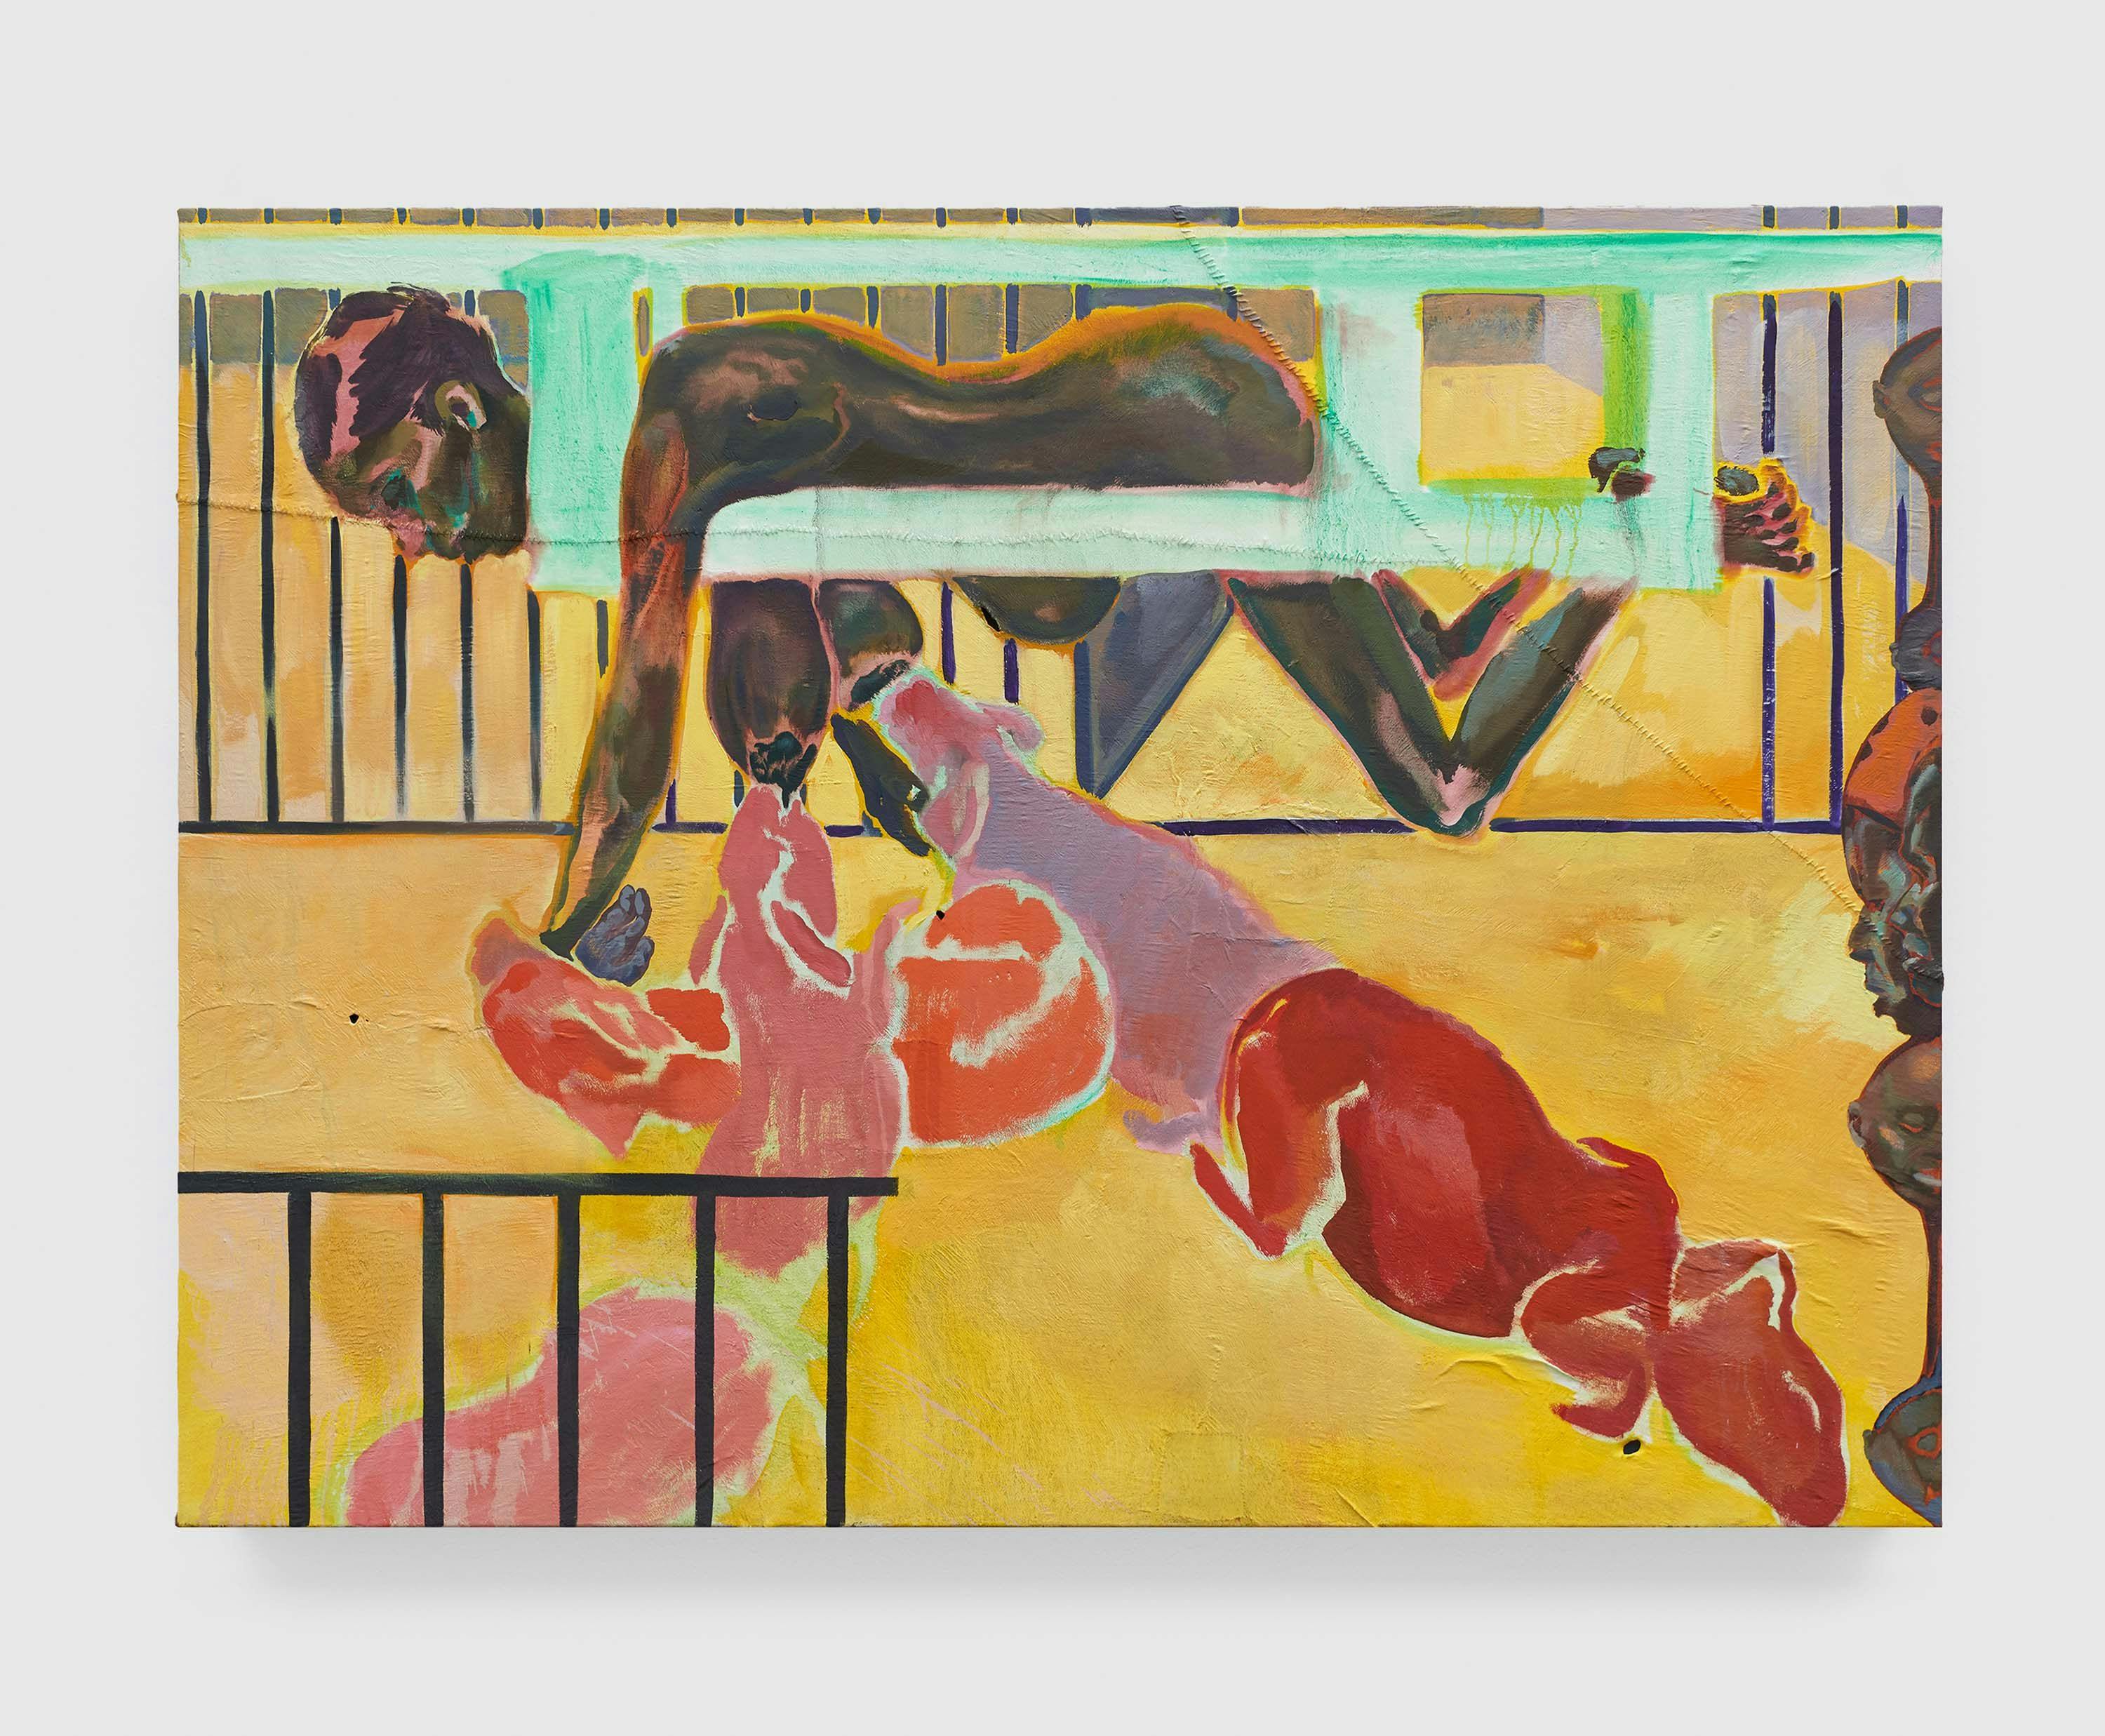 A painting by Michael Armitage, titled Mother's Milk, dated 2022.